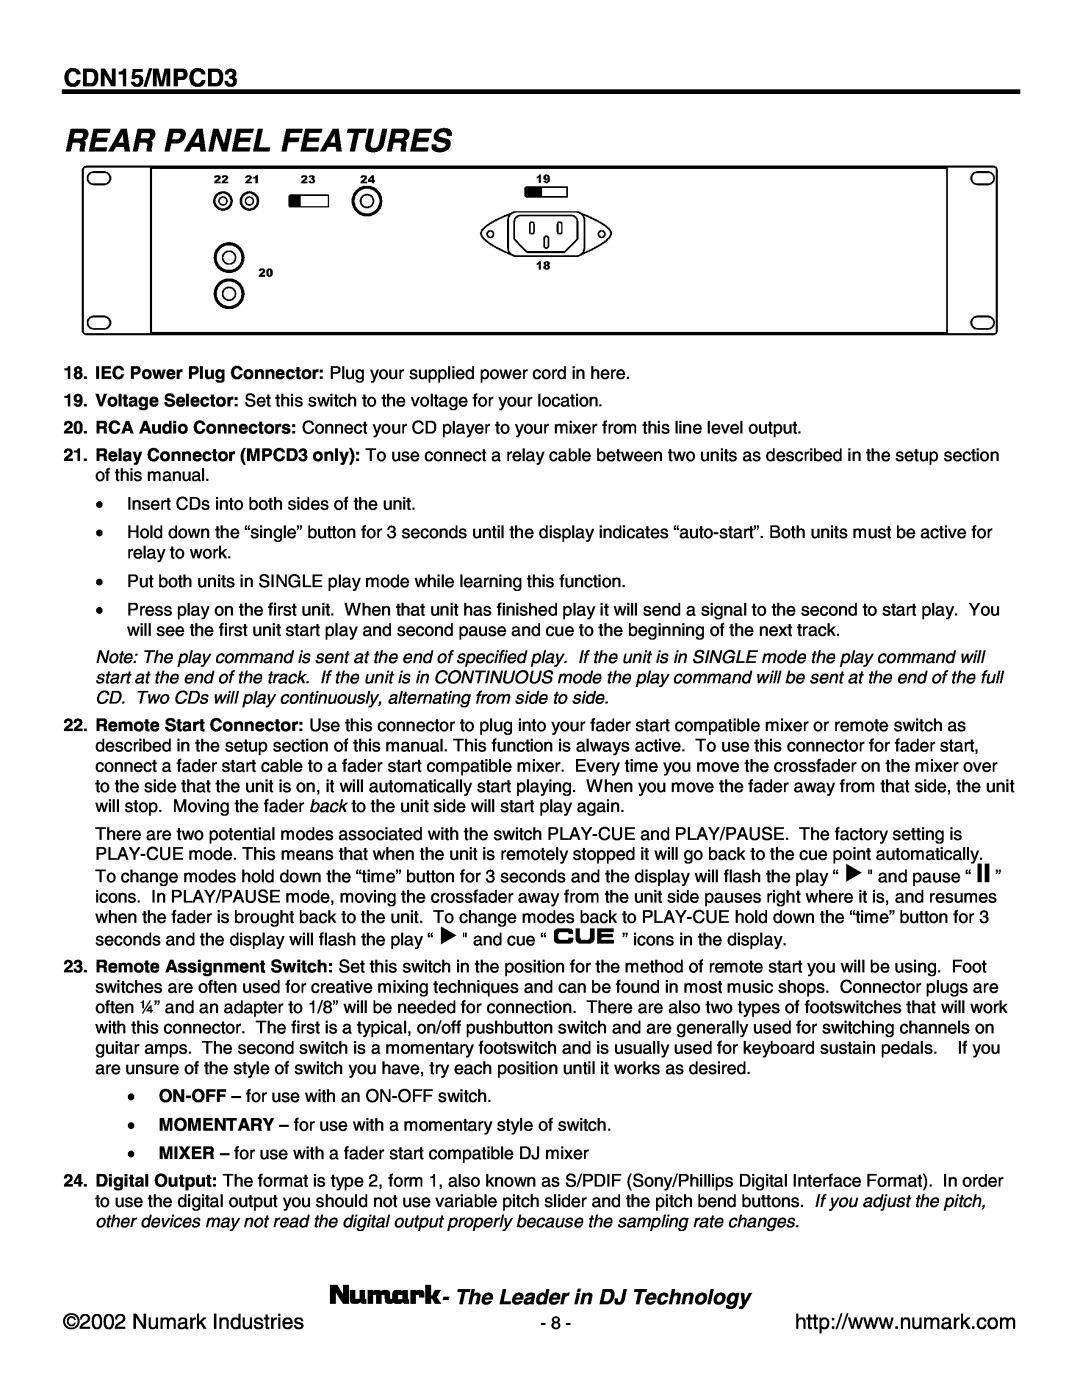 Numark Industries MPCD3, CDN15 user manual Rear Panel Features, The Leader in DJ Technology 